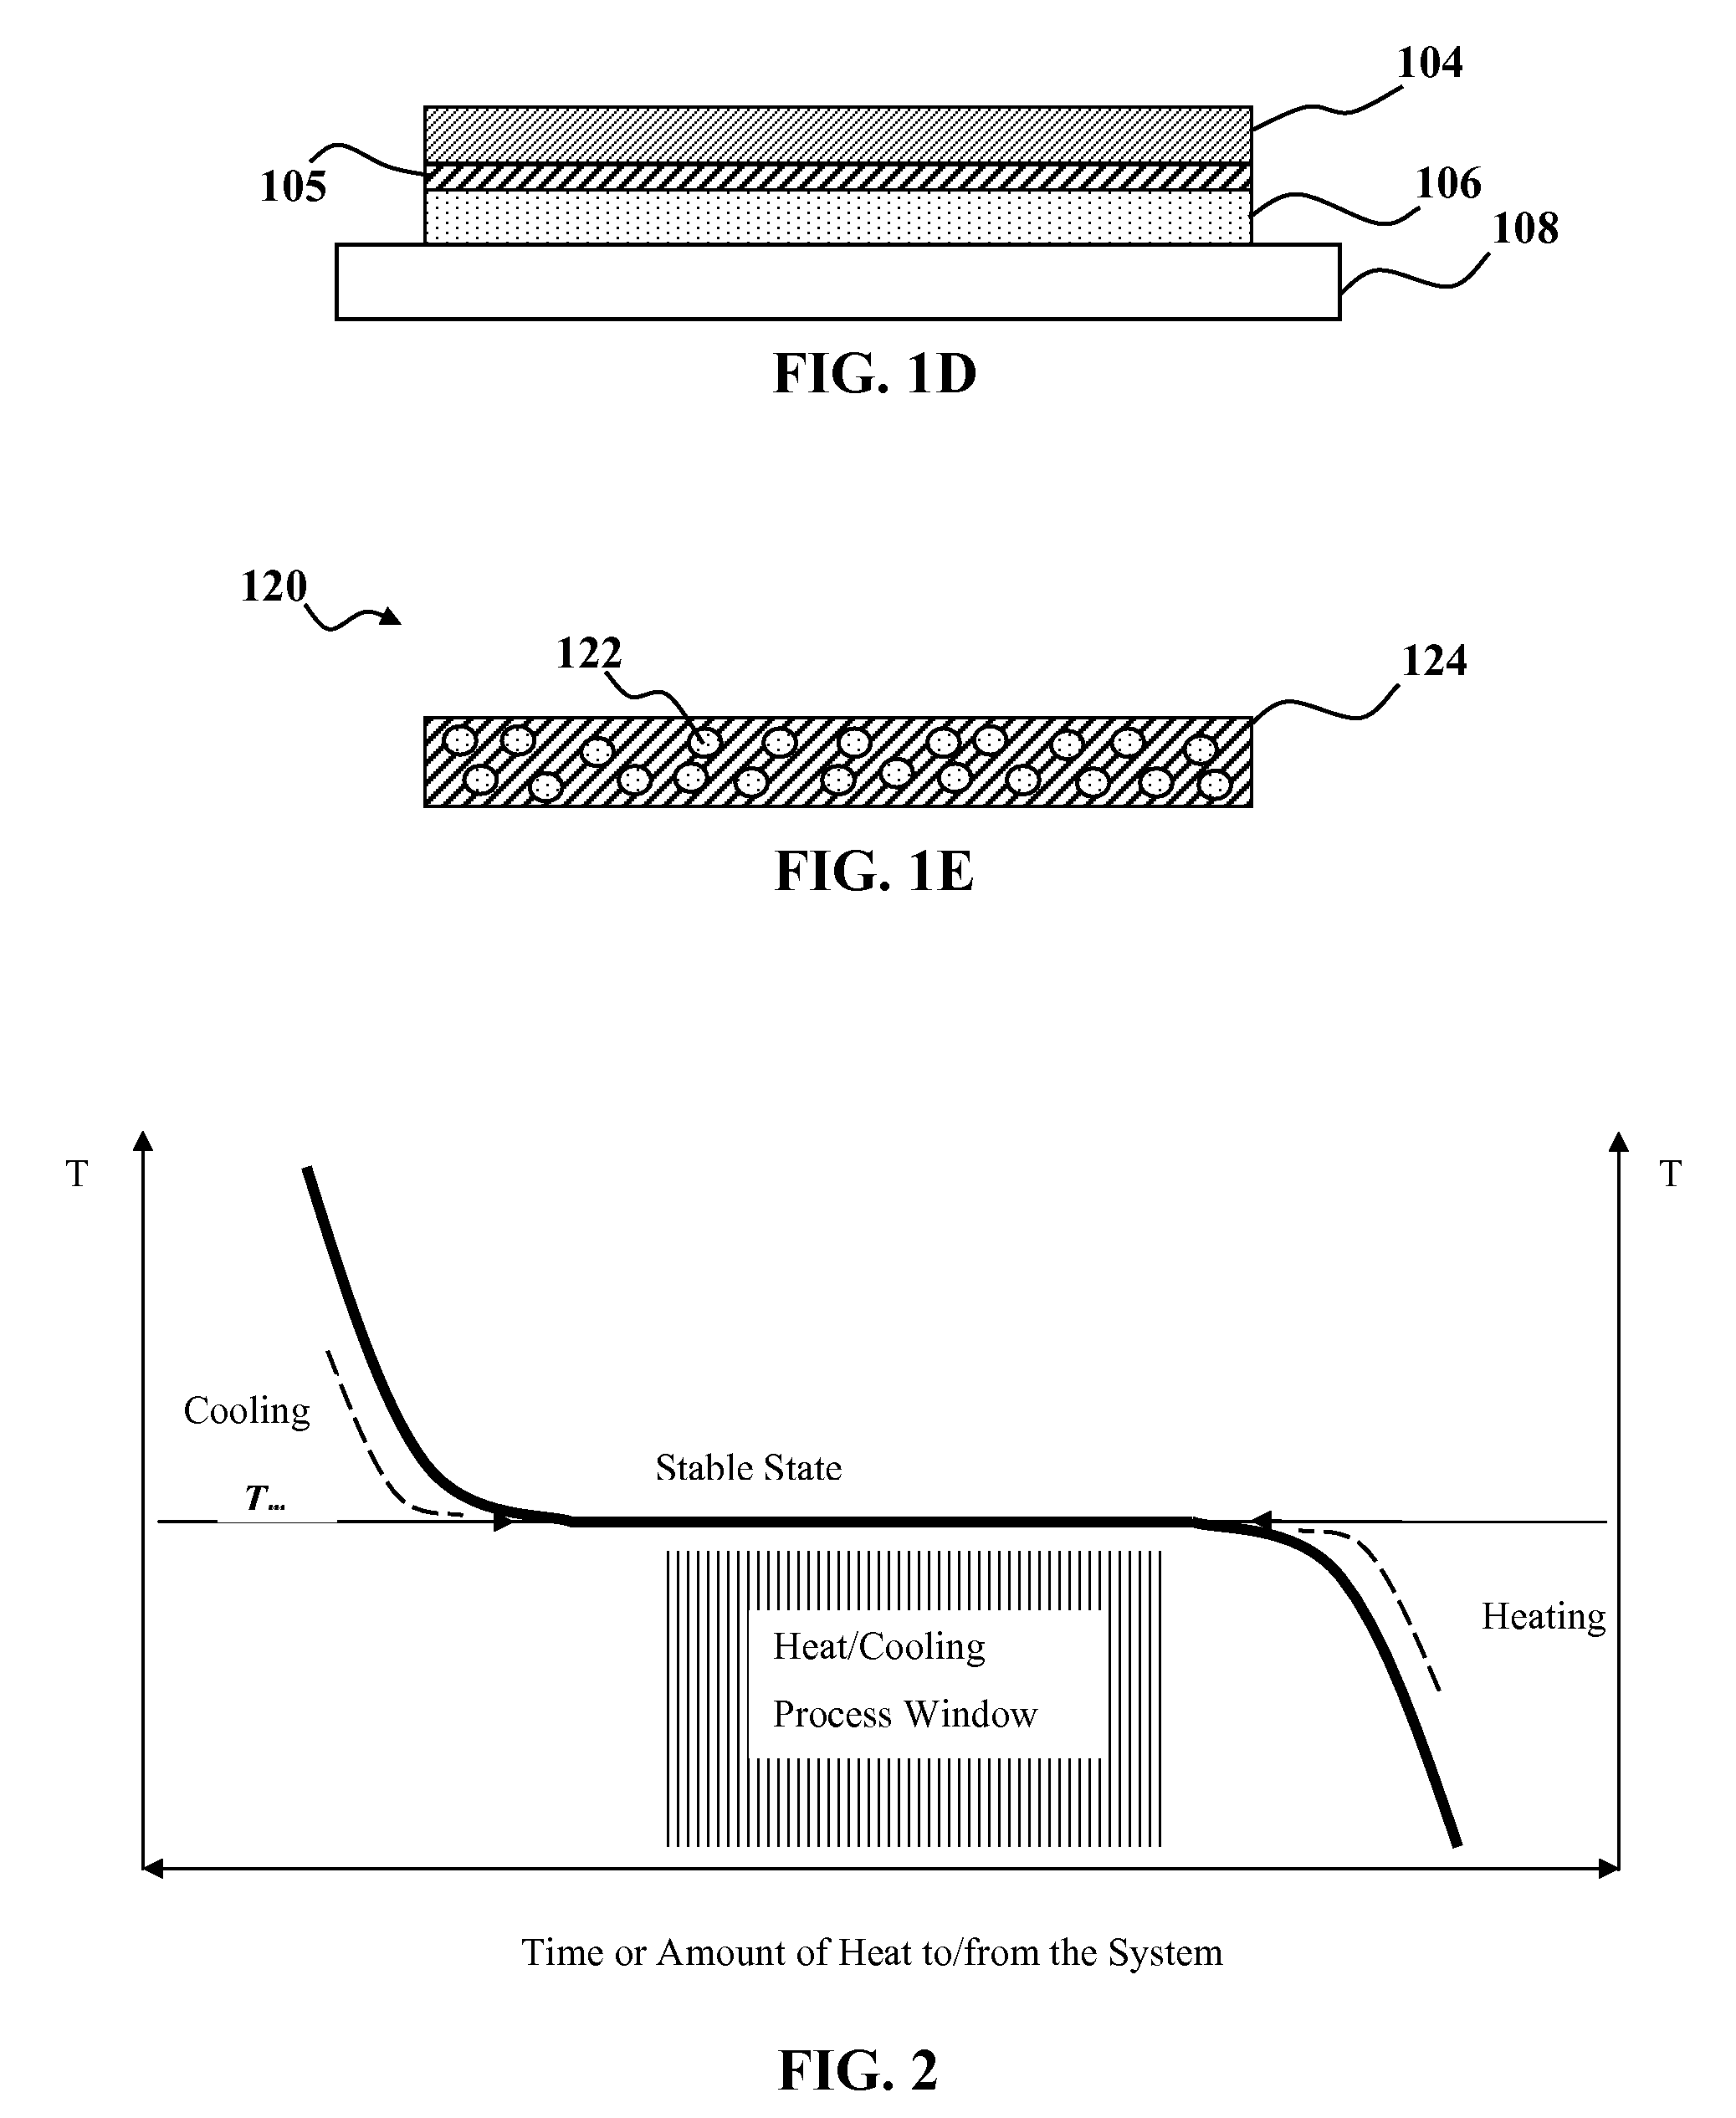 Temperature stabilization for substrate processing